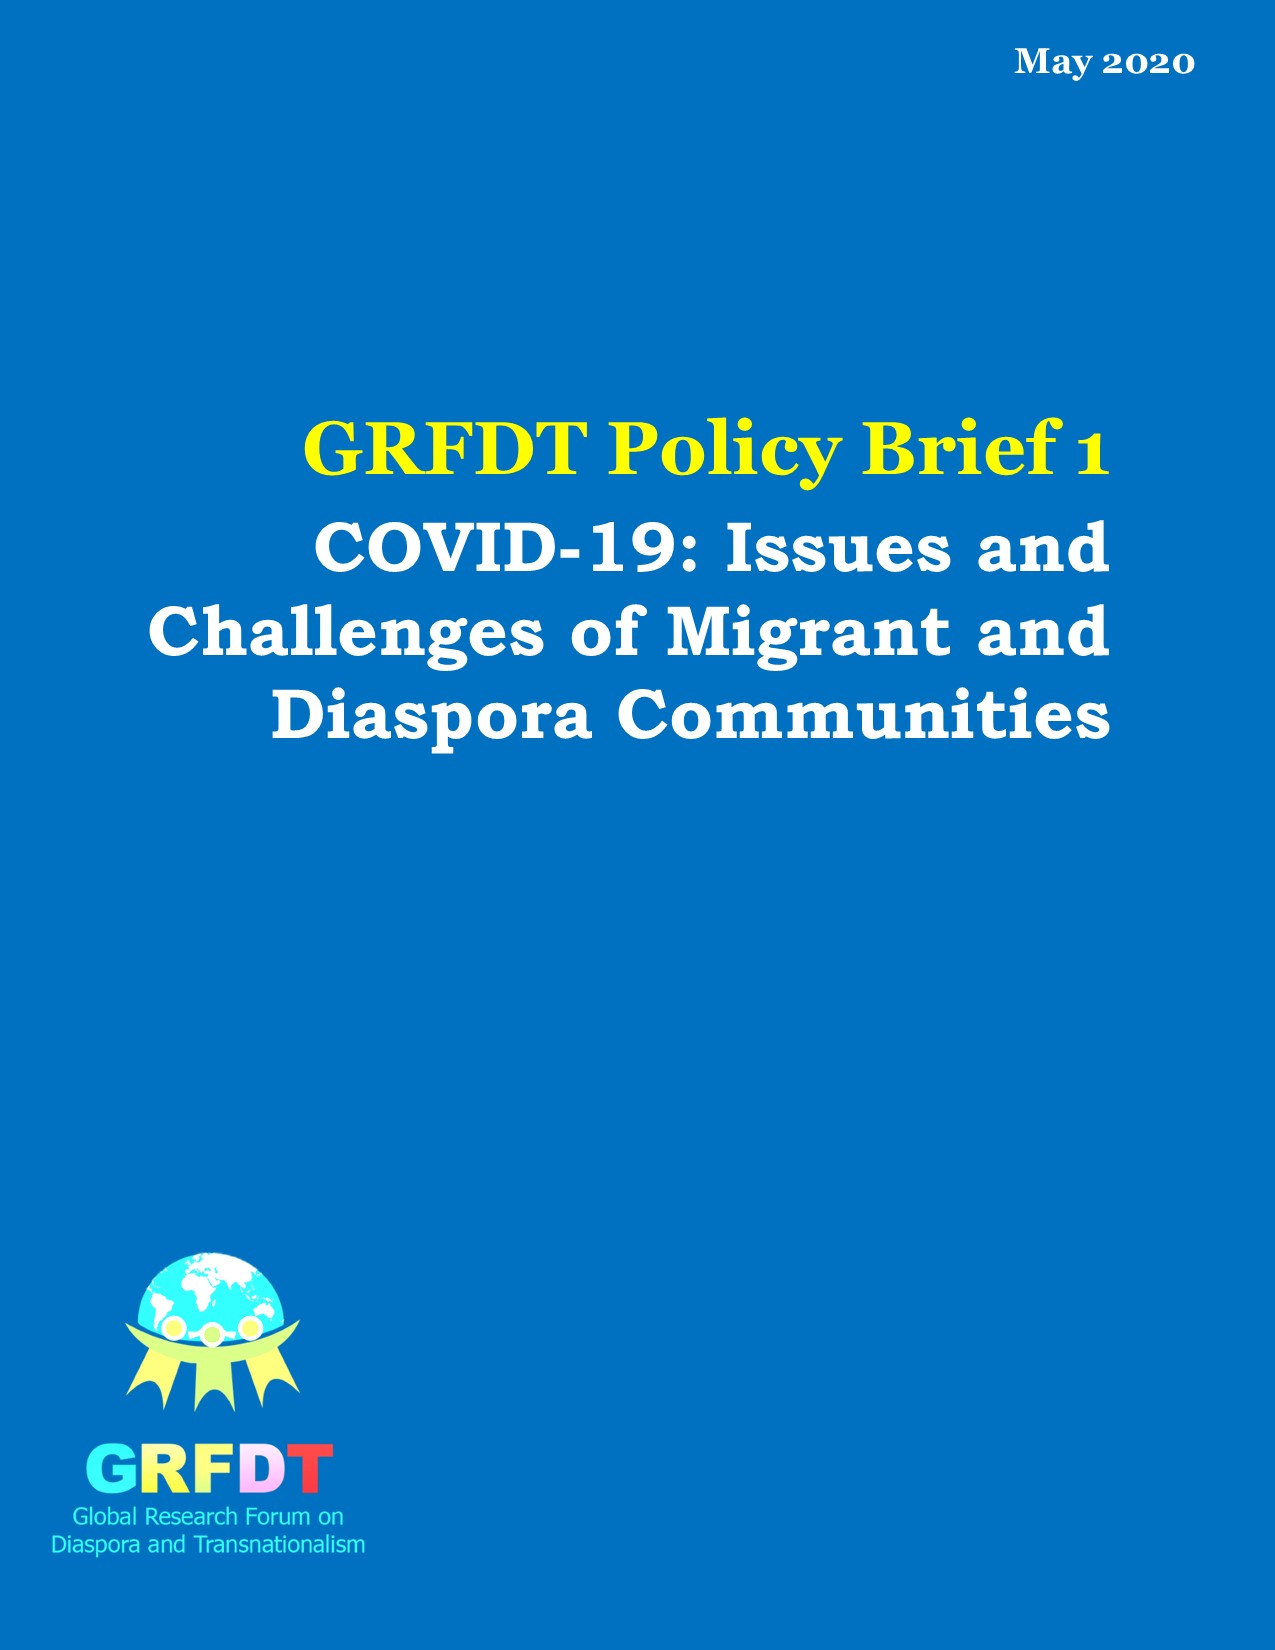 COVID-19: Issues and Challenges of Migrant and Diaspora Communities